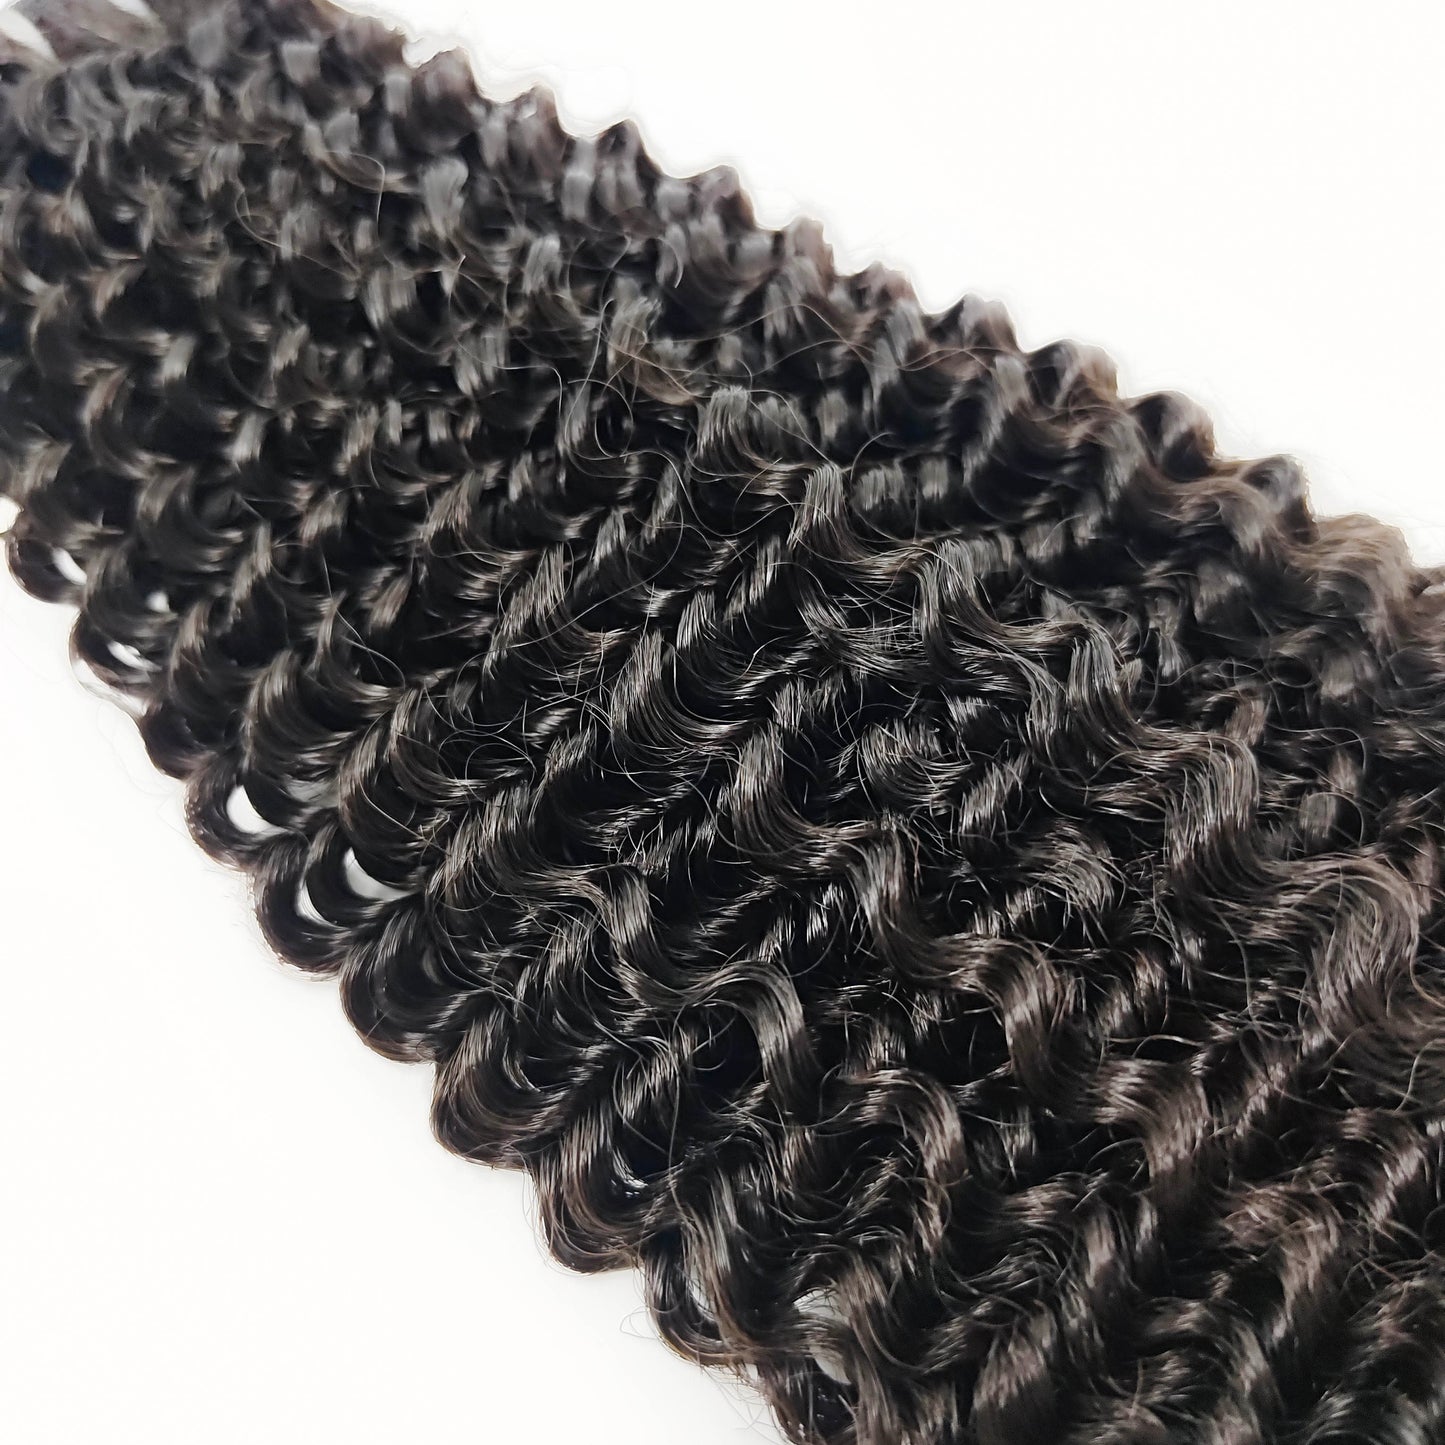 Long Length kinky curl Virgin Human Hair Extensions with 3 Years Life Time